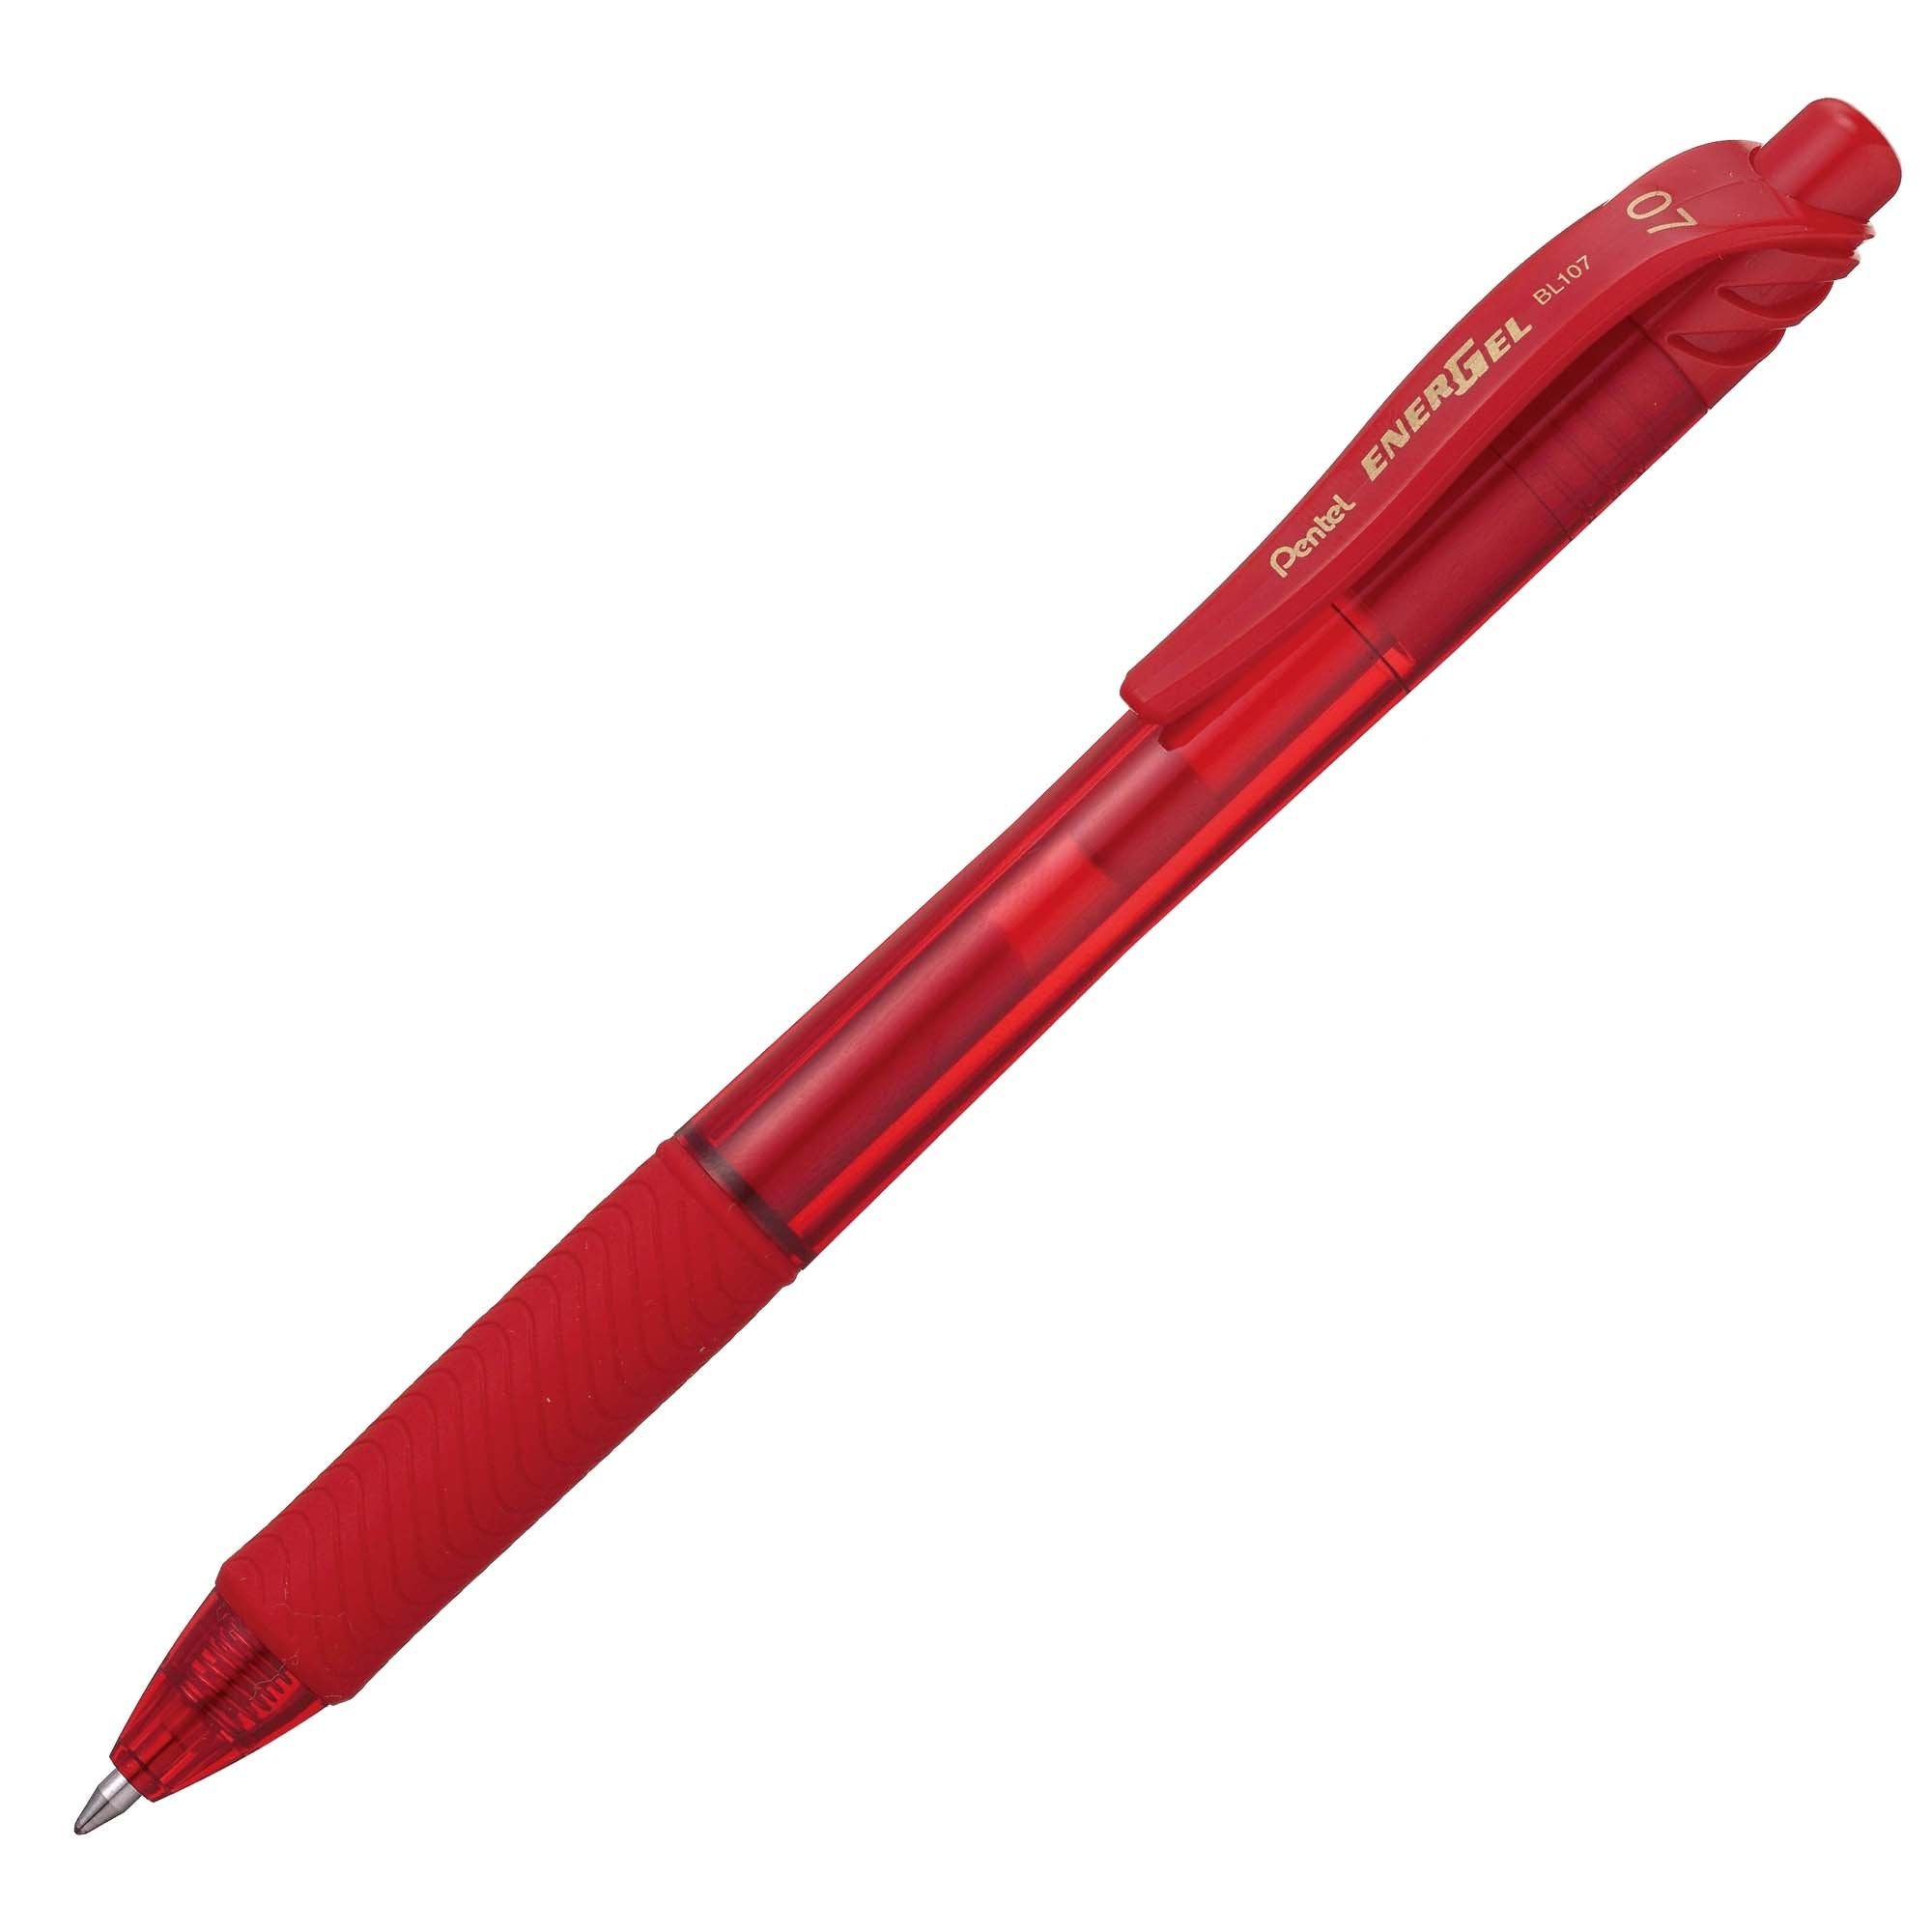 pentel-roller-scatto-energel-x-bl107-rosso-0-7mm